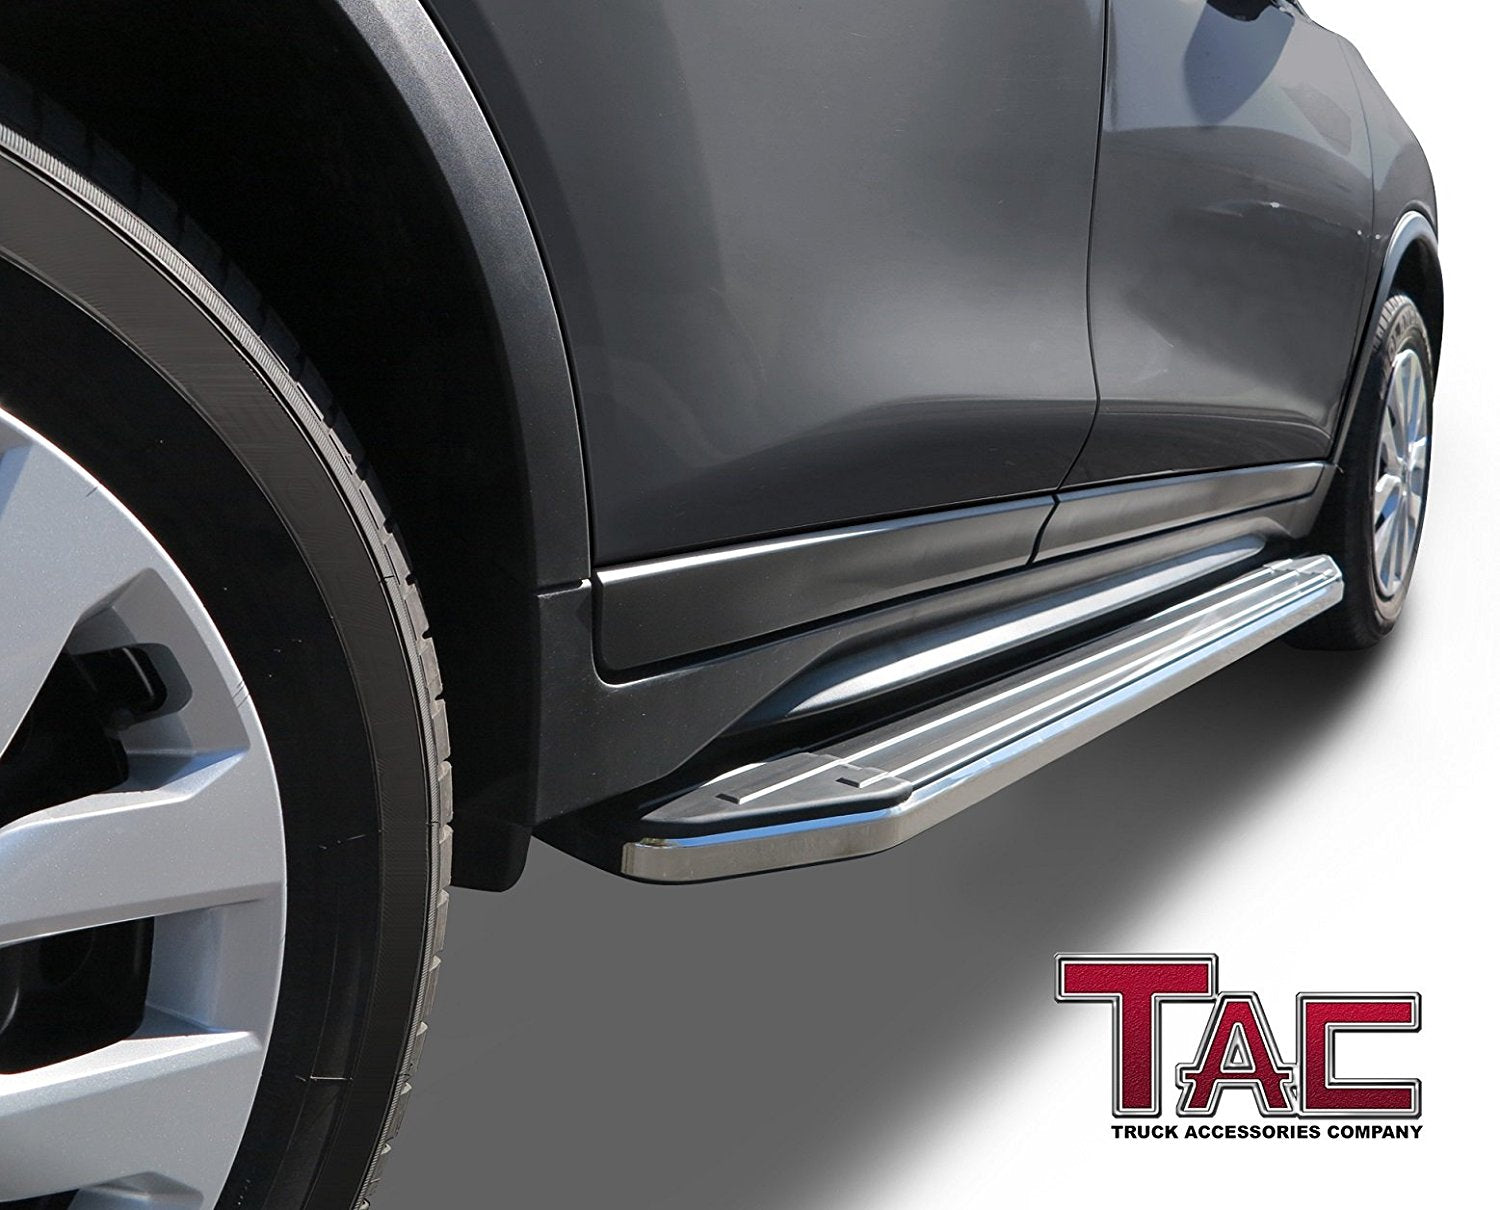 TAC ViewPoint Running Boards Fit 2005-2012 Nissan Pathfinder (No Drilling/Cutting Required) SUV | Side Steps | Nerf Bars | Side Bars - 0